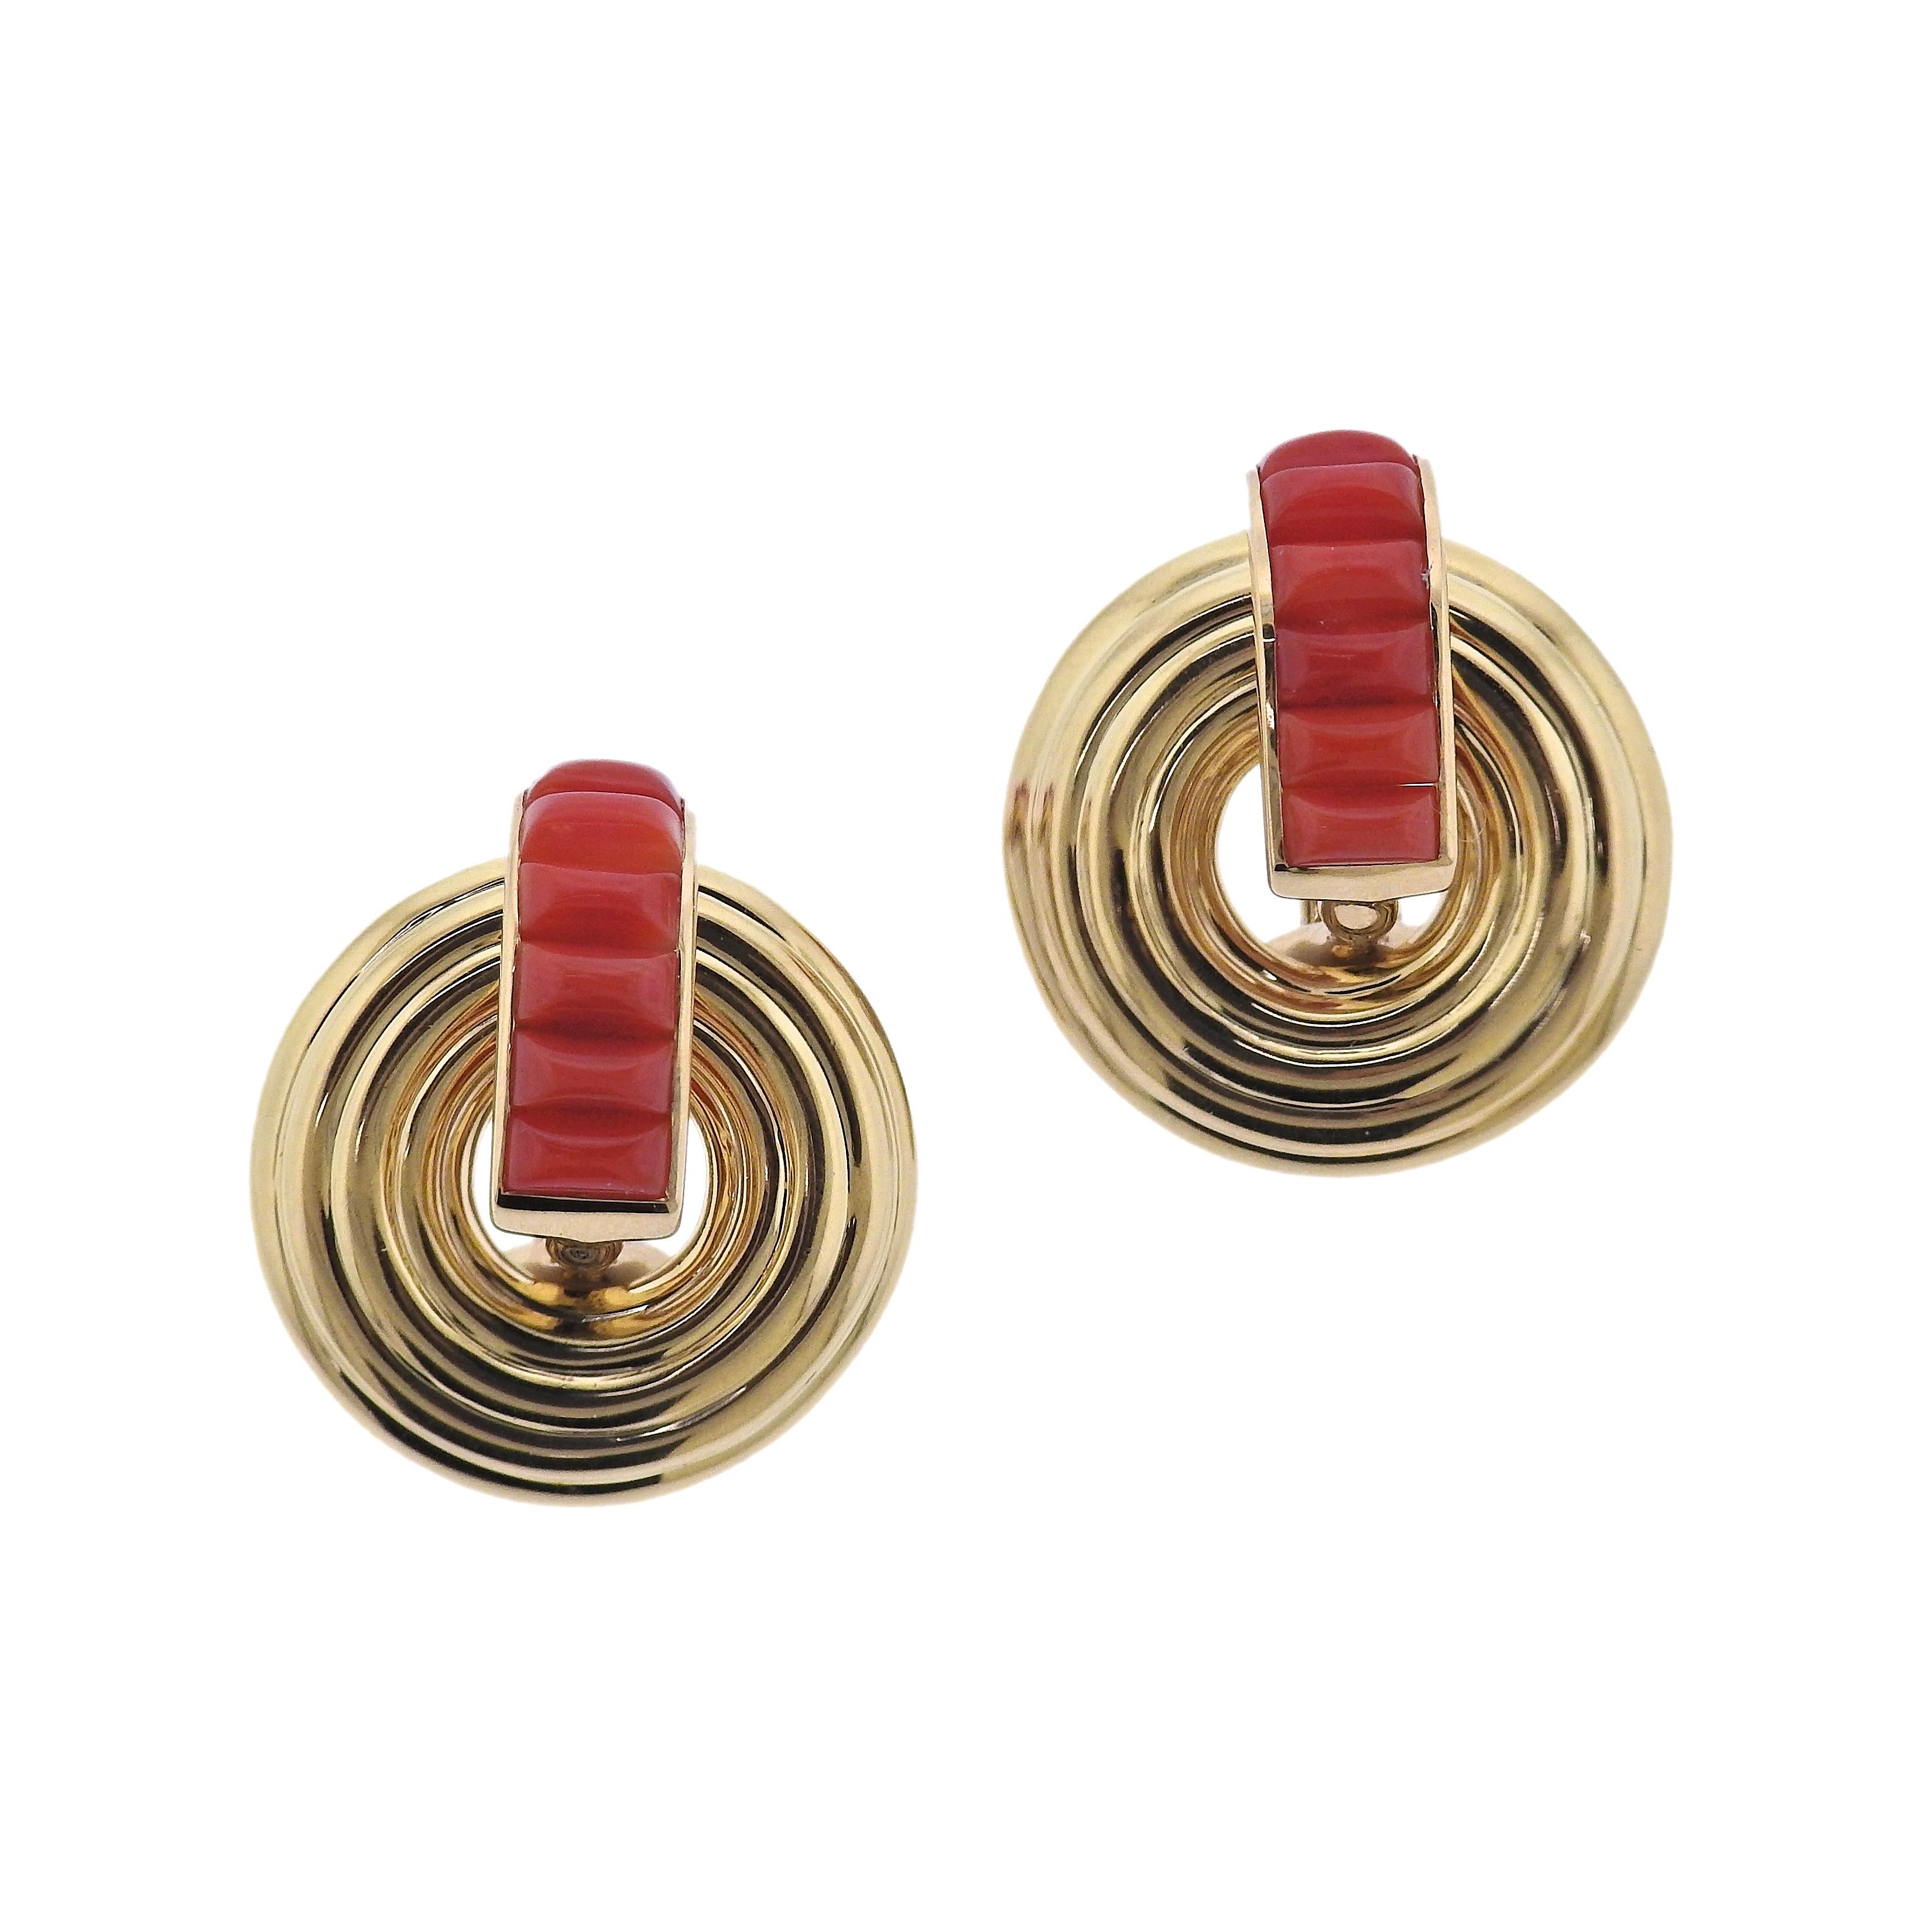 Brand new pair of Giro reversible and versatile earrings by Seaman Schepps. Set in 18k yellow gold, with white ceramic and coral. Come with packaging.  Earrings are 25mm x 21mm, circles are reversible and removable. Weight - 15.2 grams. Marked: